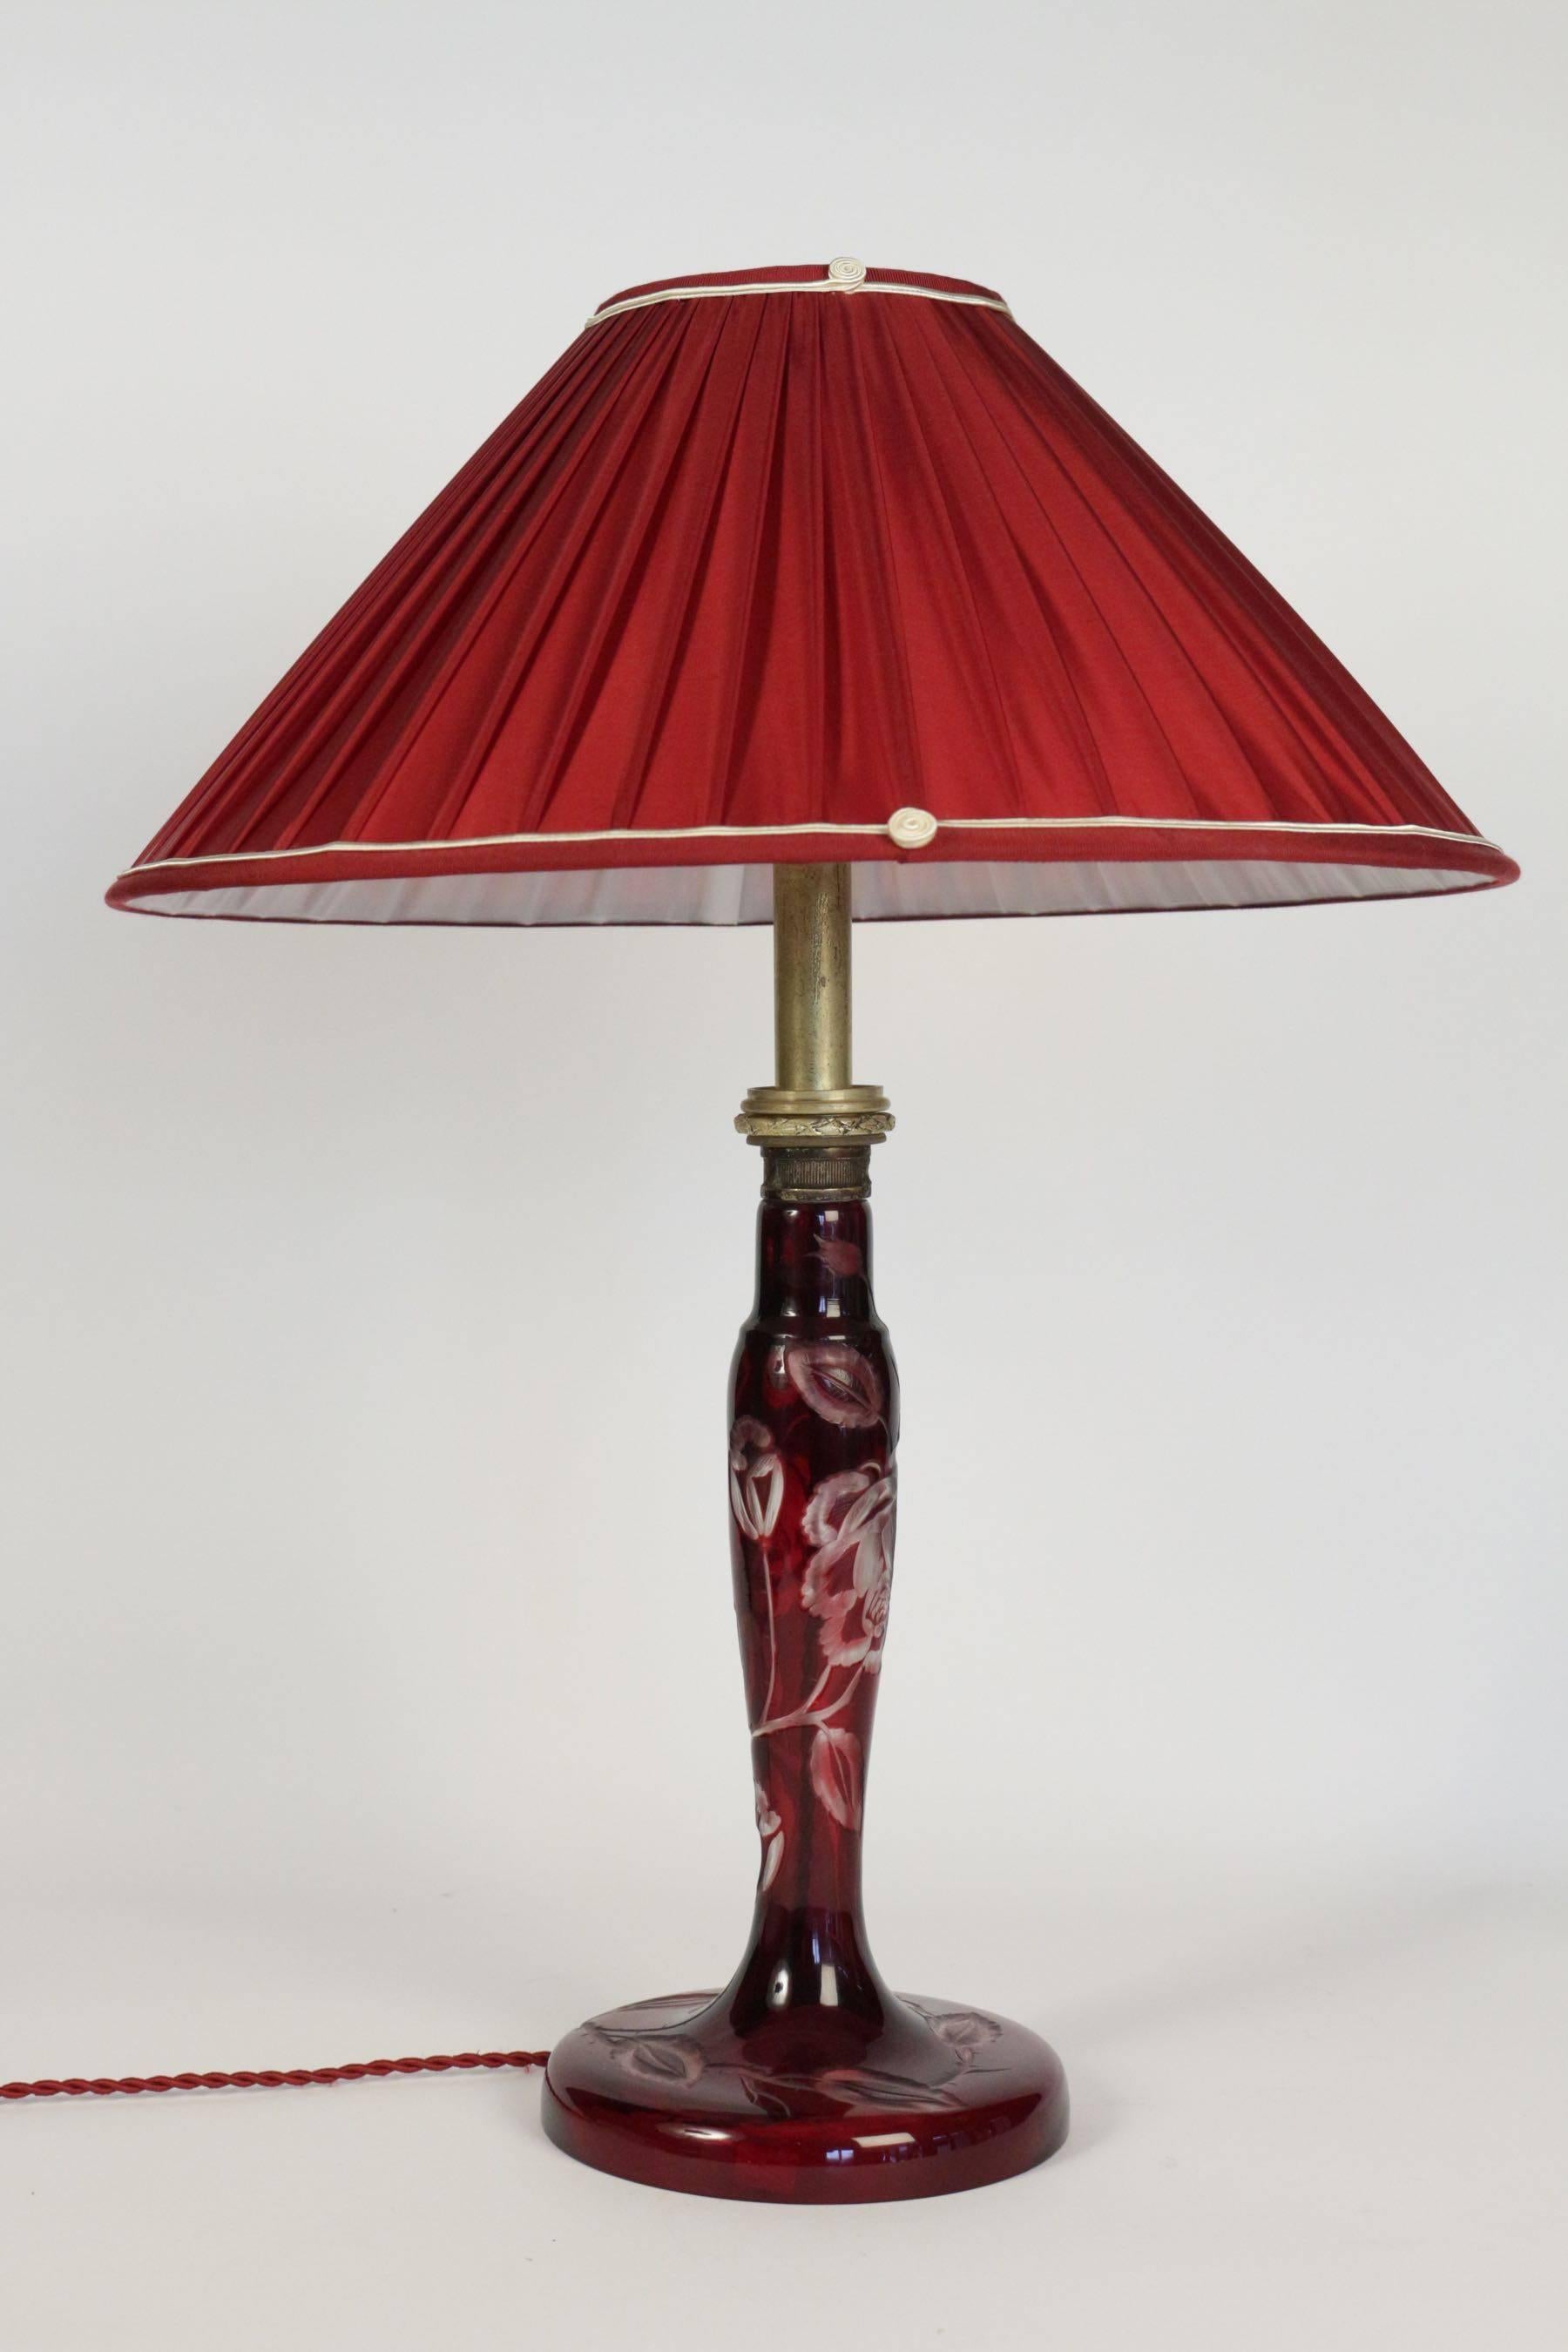 A beautiful Art Nouveau table lamp in etched burgundy colored glass, circa 1900 with floral motifs.
  